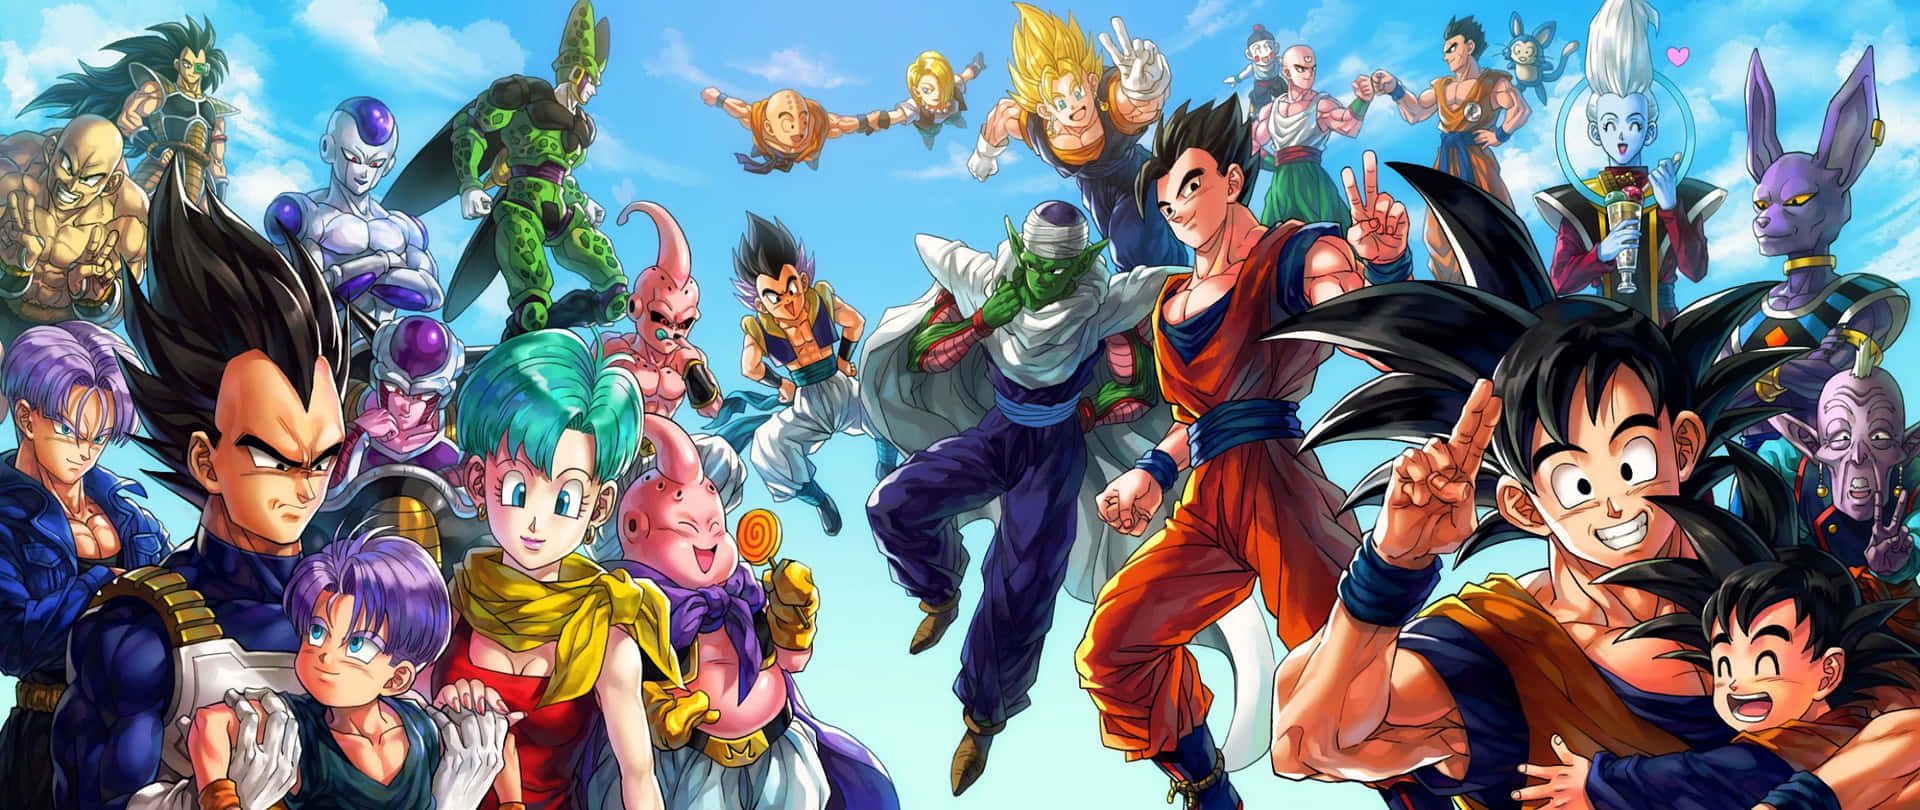 Unleash your true power and join the fight with Cool Dragon Ball Wallpaper